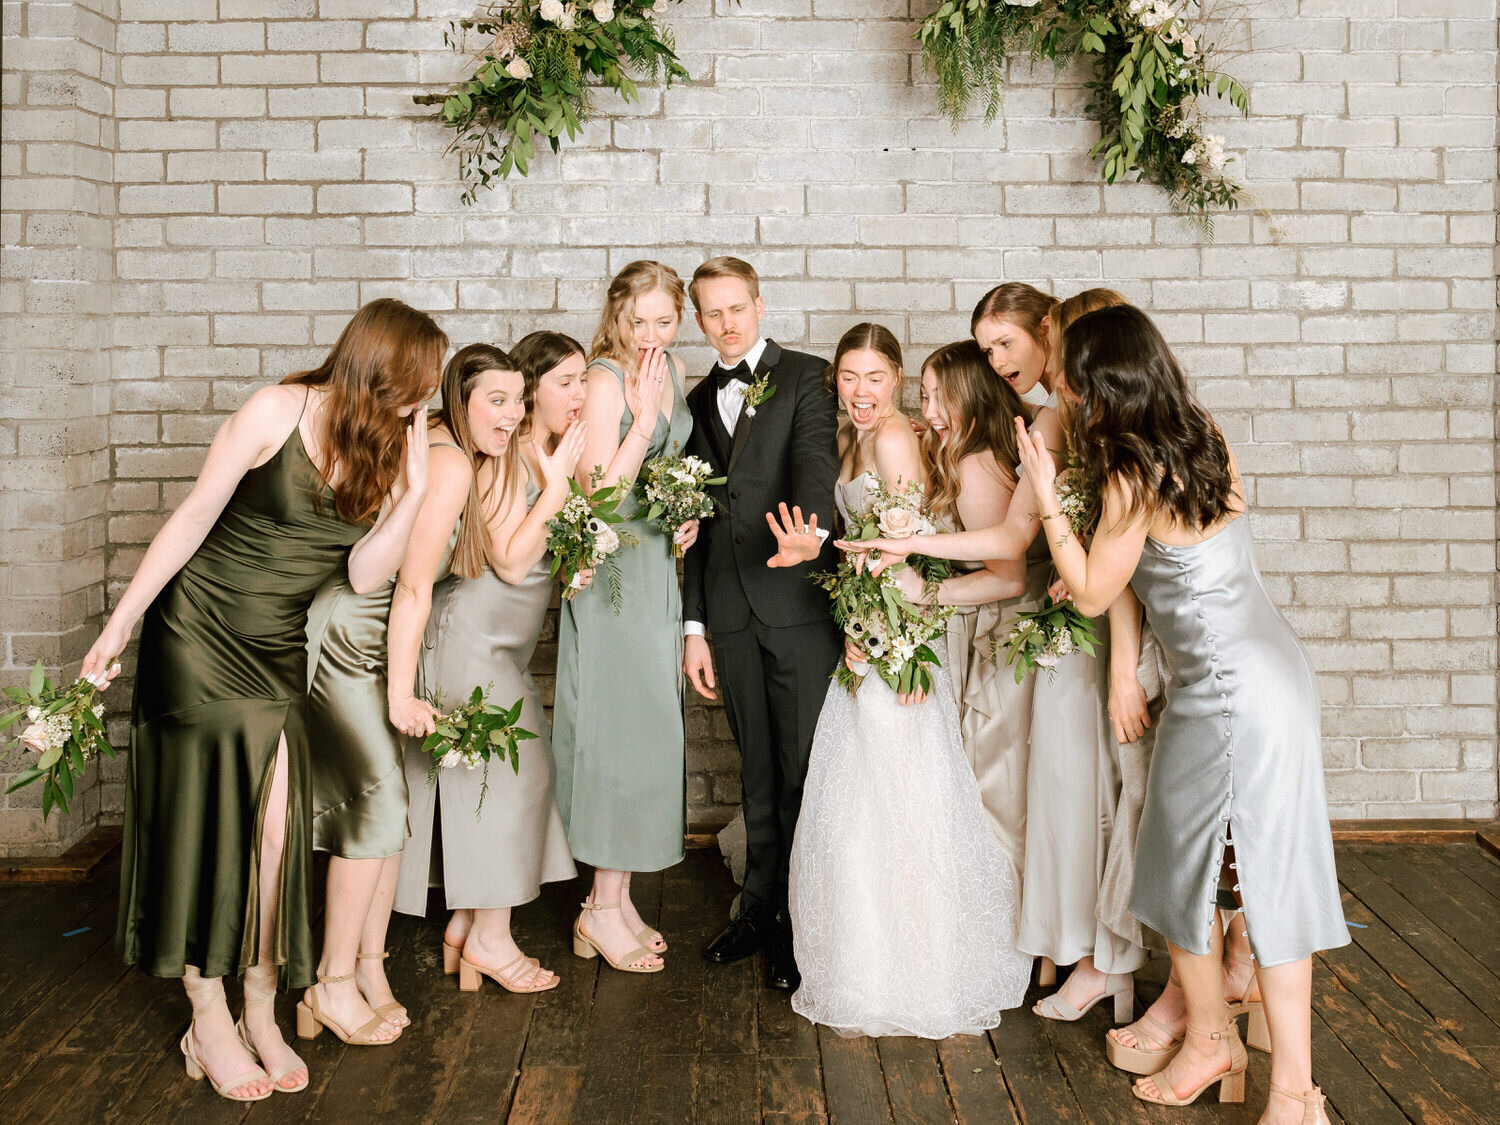 Bridal party makes a silly face during a portrait